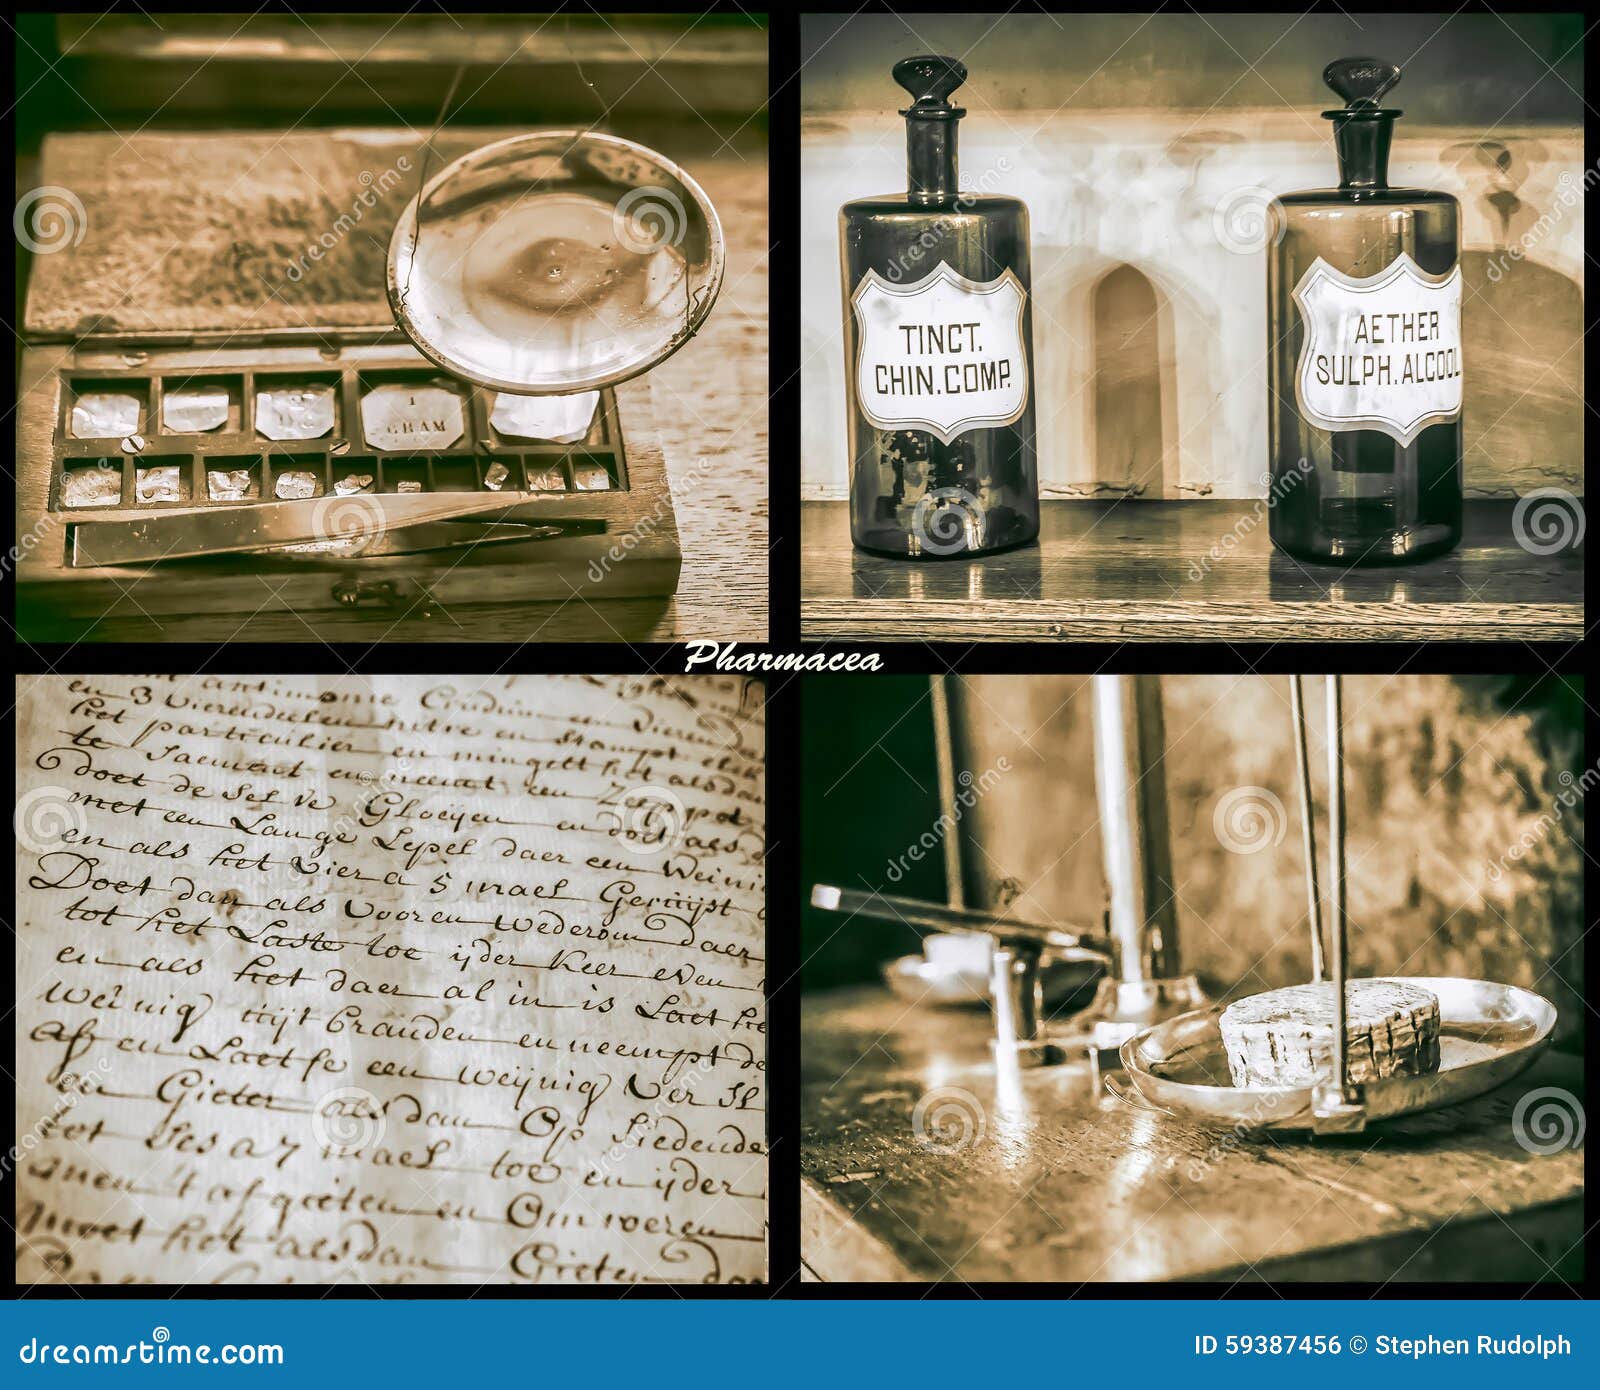 Medieval Occupations and Jobs: Apothecary. History of Apothecary